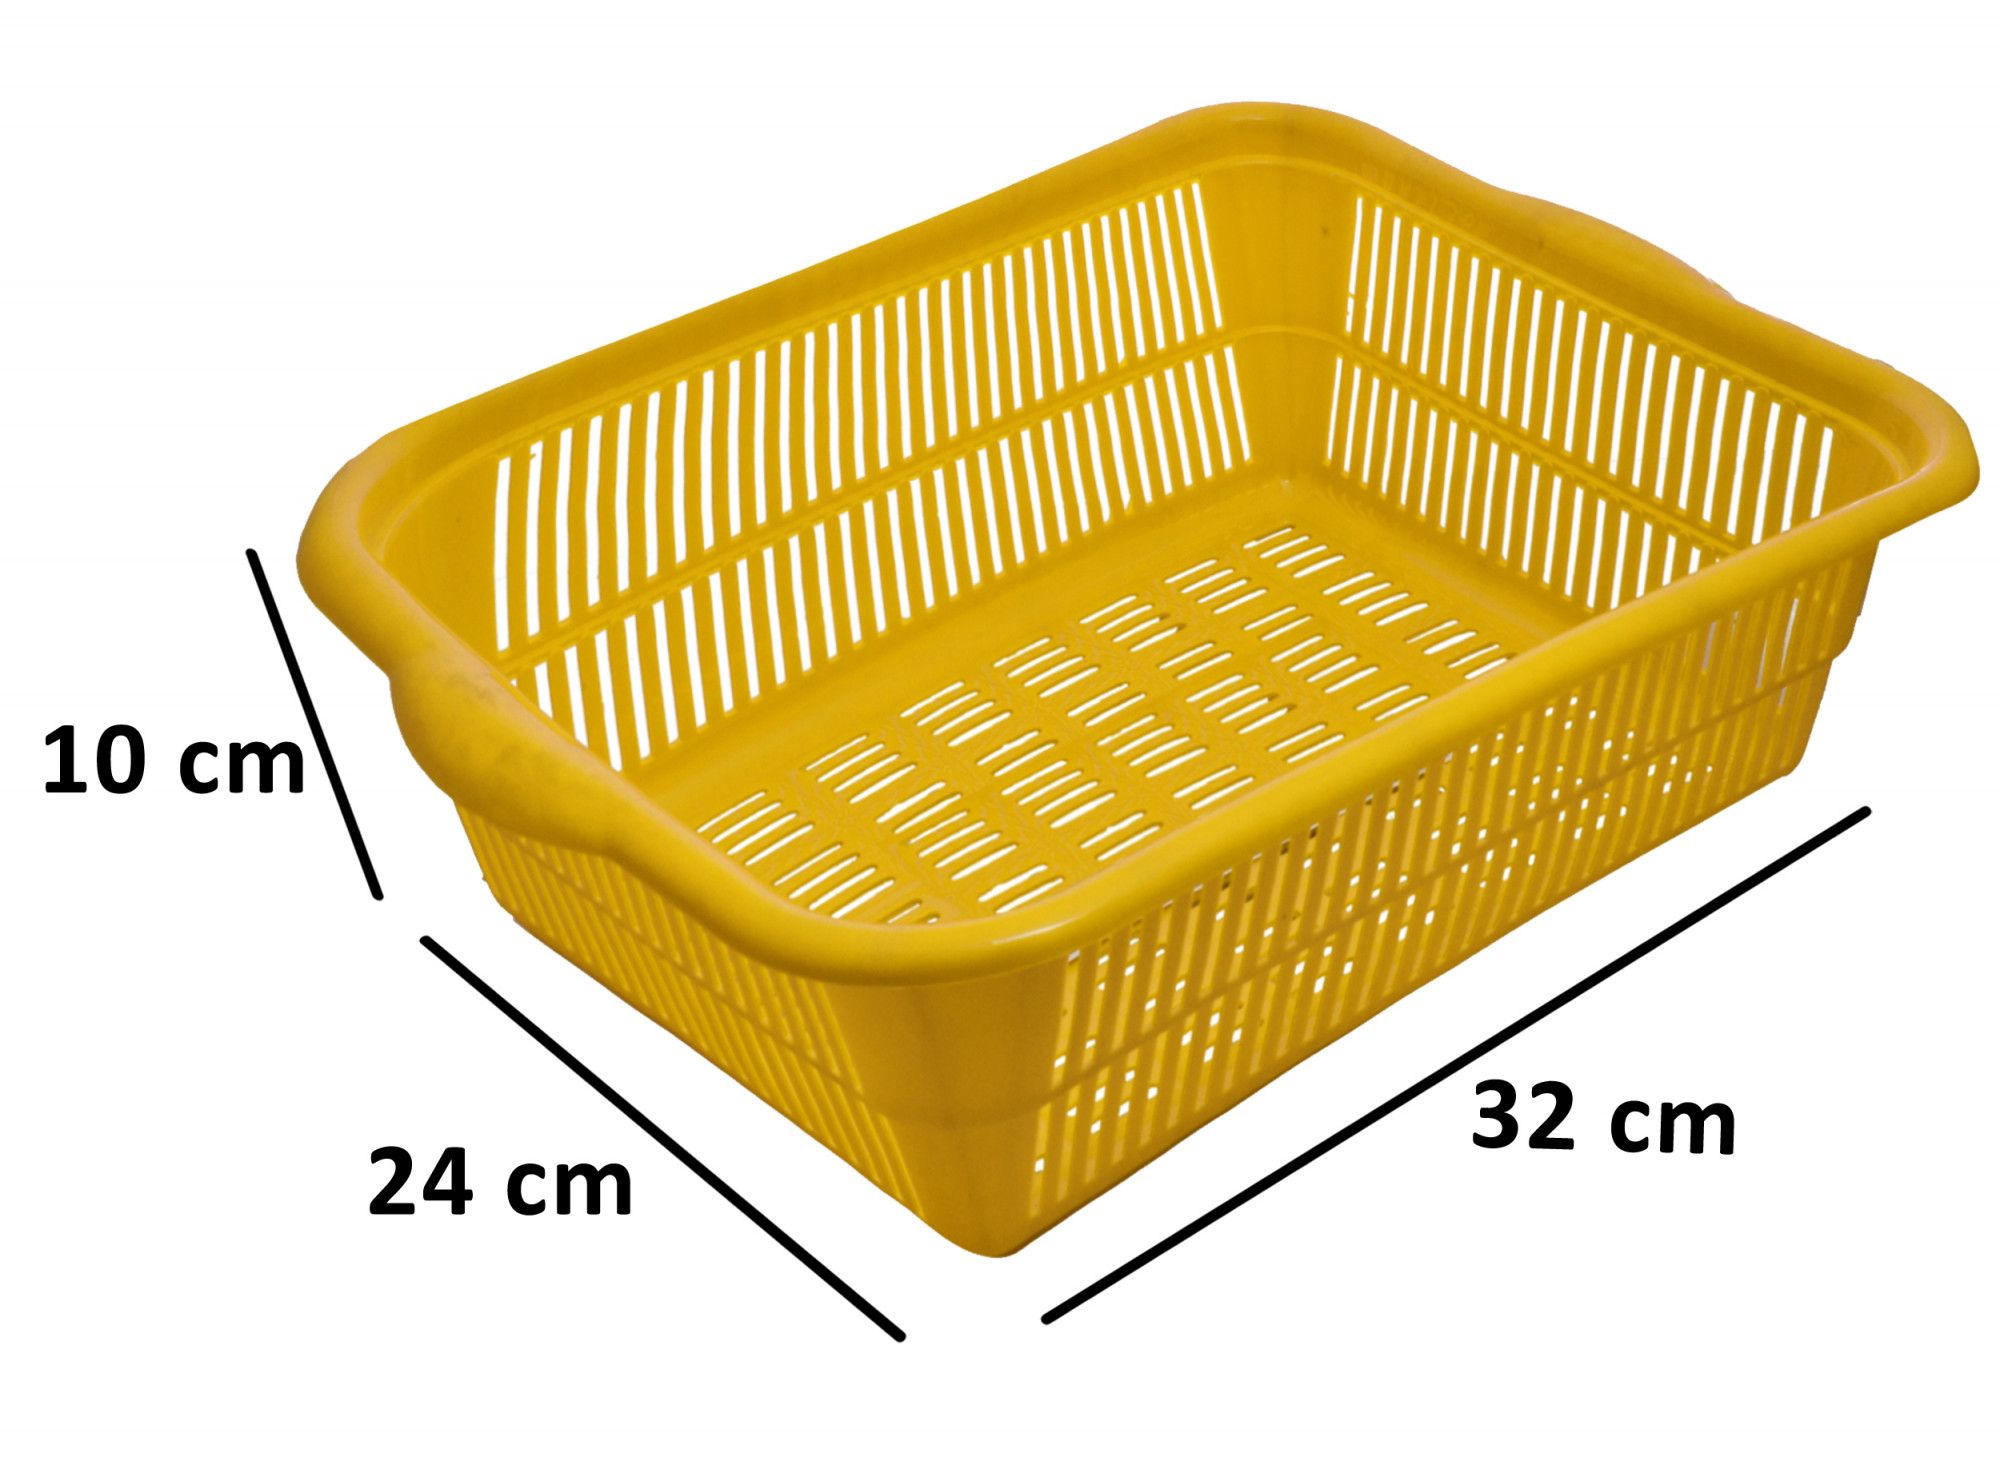 Kuber Industries 4 Pieces Plastic Kitchen Dish Rack Drainer Vegetables And Fruits Basket Dish Rack Multipurpose Organizers ,Small Size,Yellow